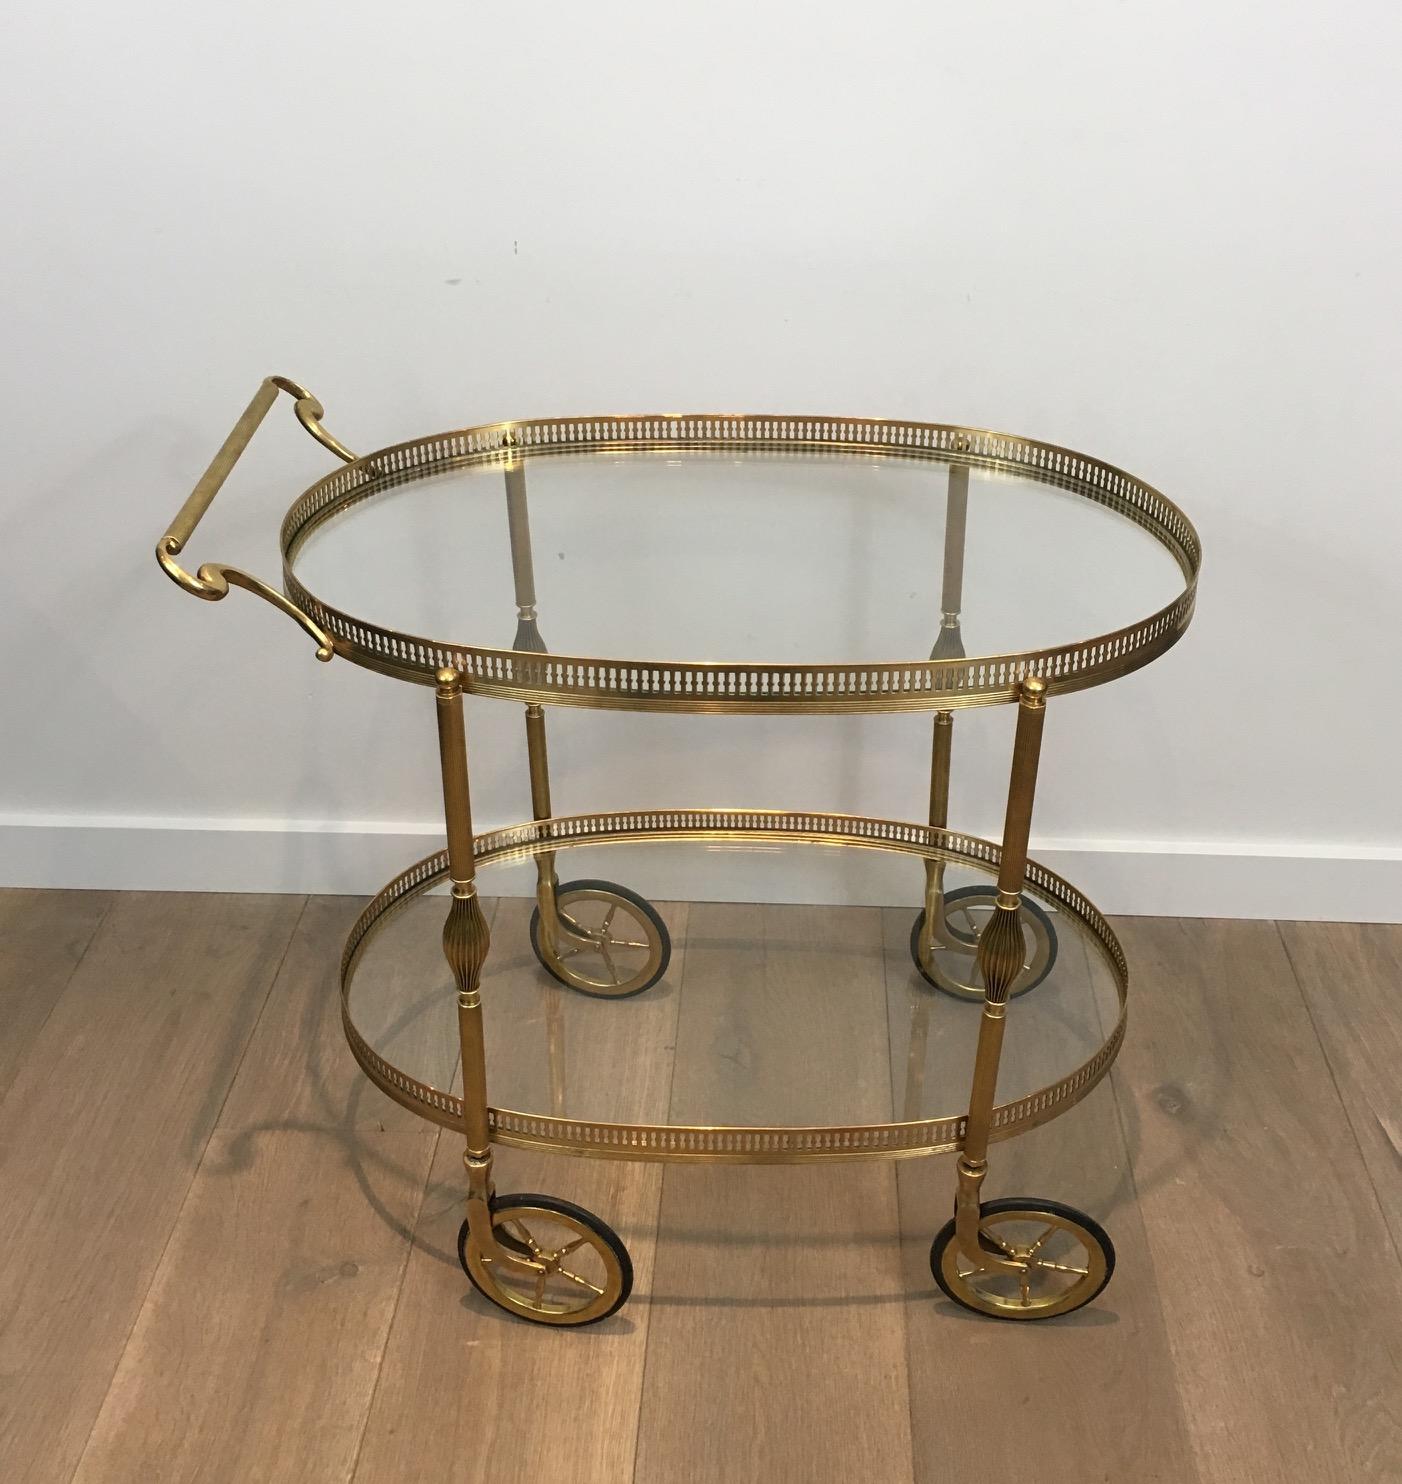 This neoclassical oval bar cart is made of brass with 2 glass shelves. This is a very fine work and this drinks trolley can be attributed to Maison Jansen, French, circa 1940.